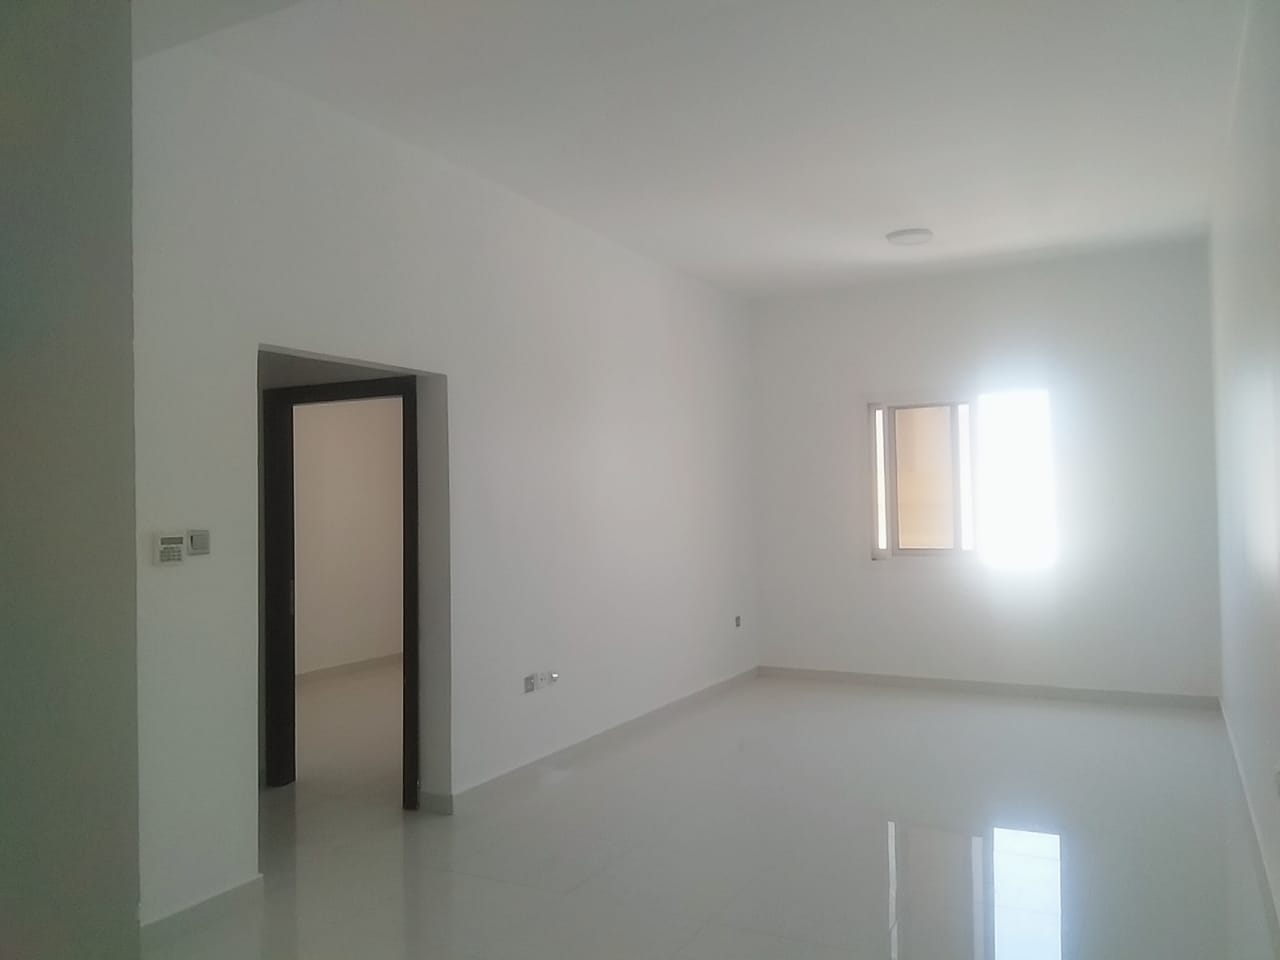 2 Bedroom Hall Apartment With Balcony Available For Rent || 28,000 AED Yearly || + 1 Month Free || Al Mwaihat, (Ajman)